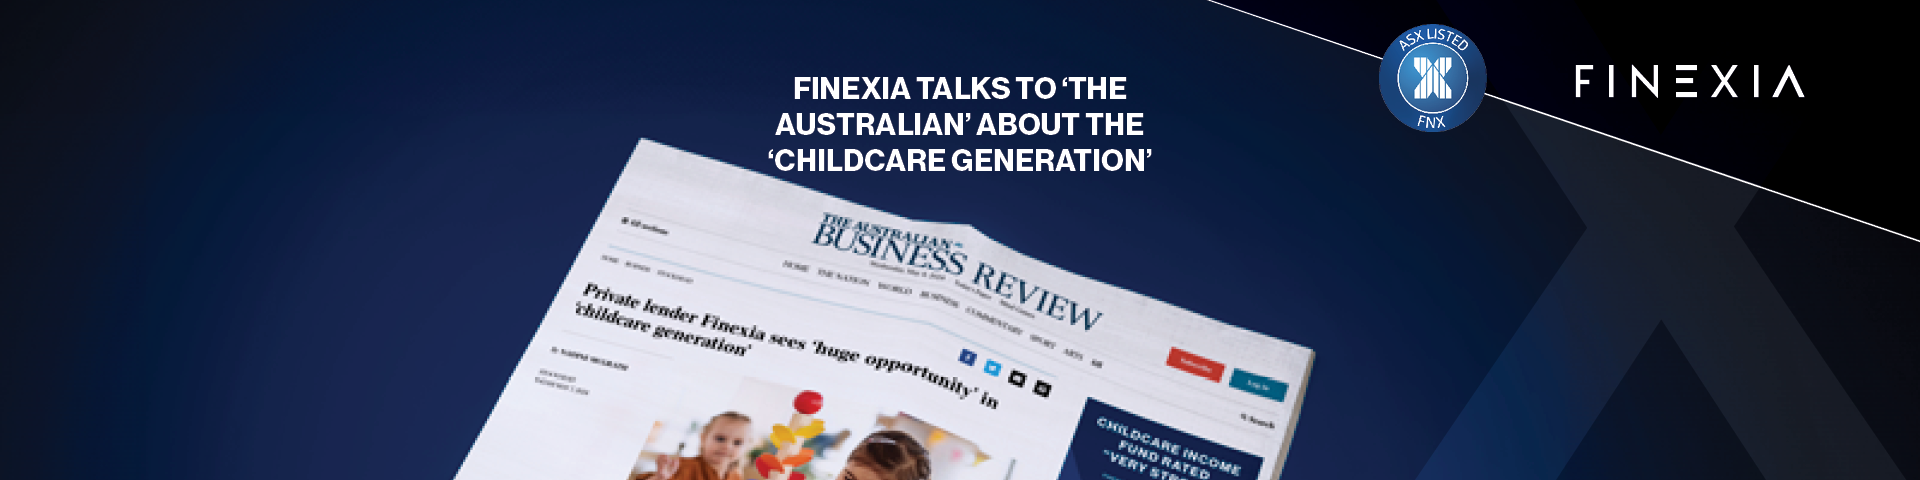 Finexia talks to ‘The Australian’ about the ‘Childcare Generation’